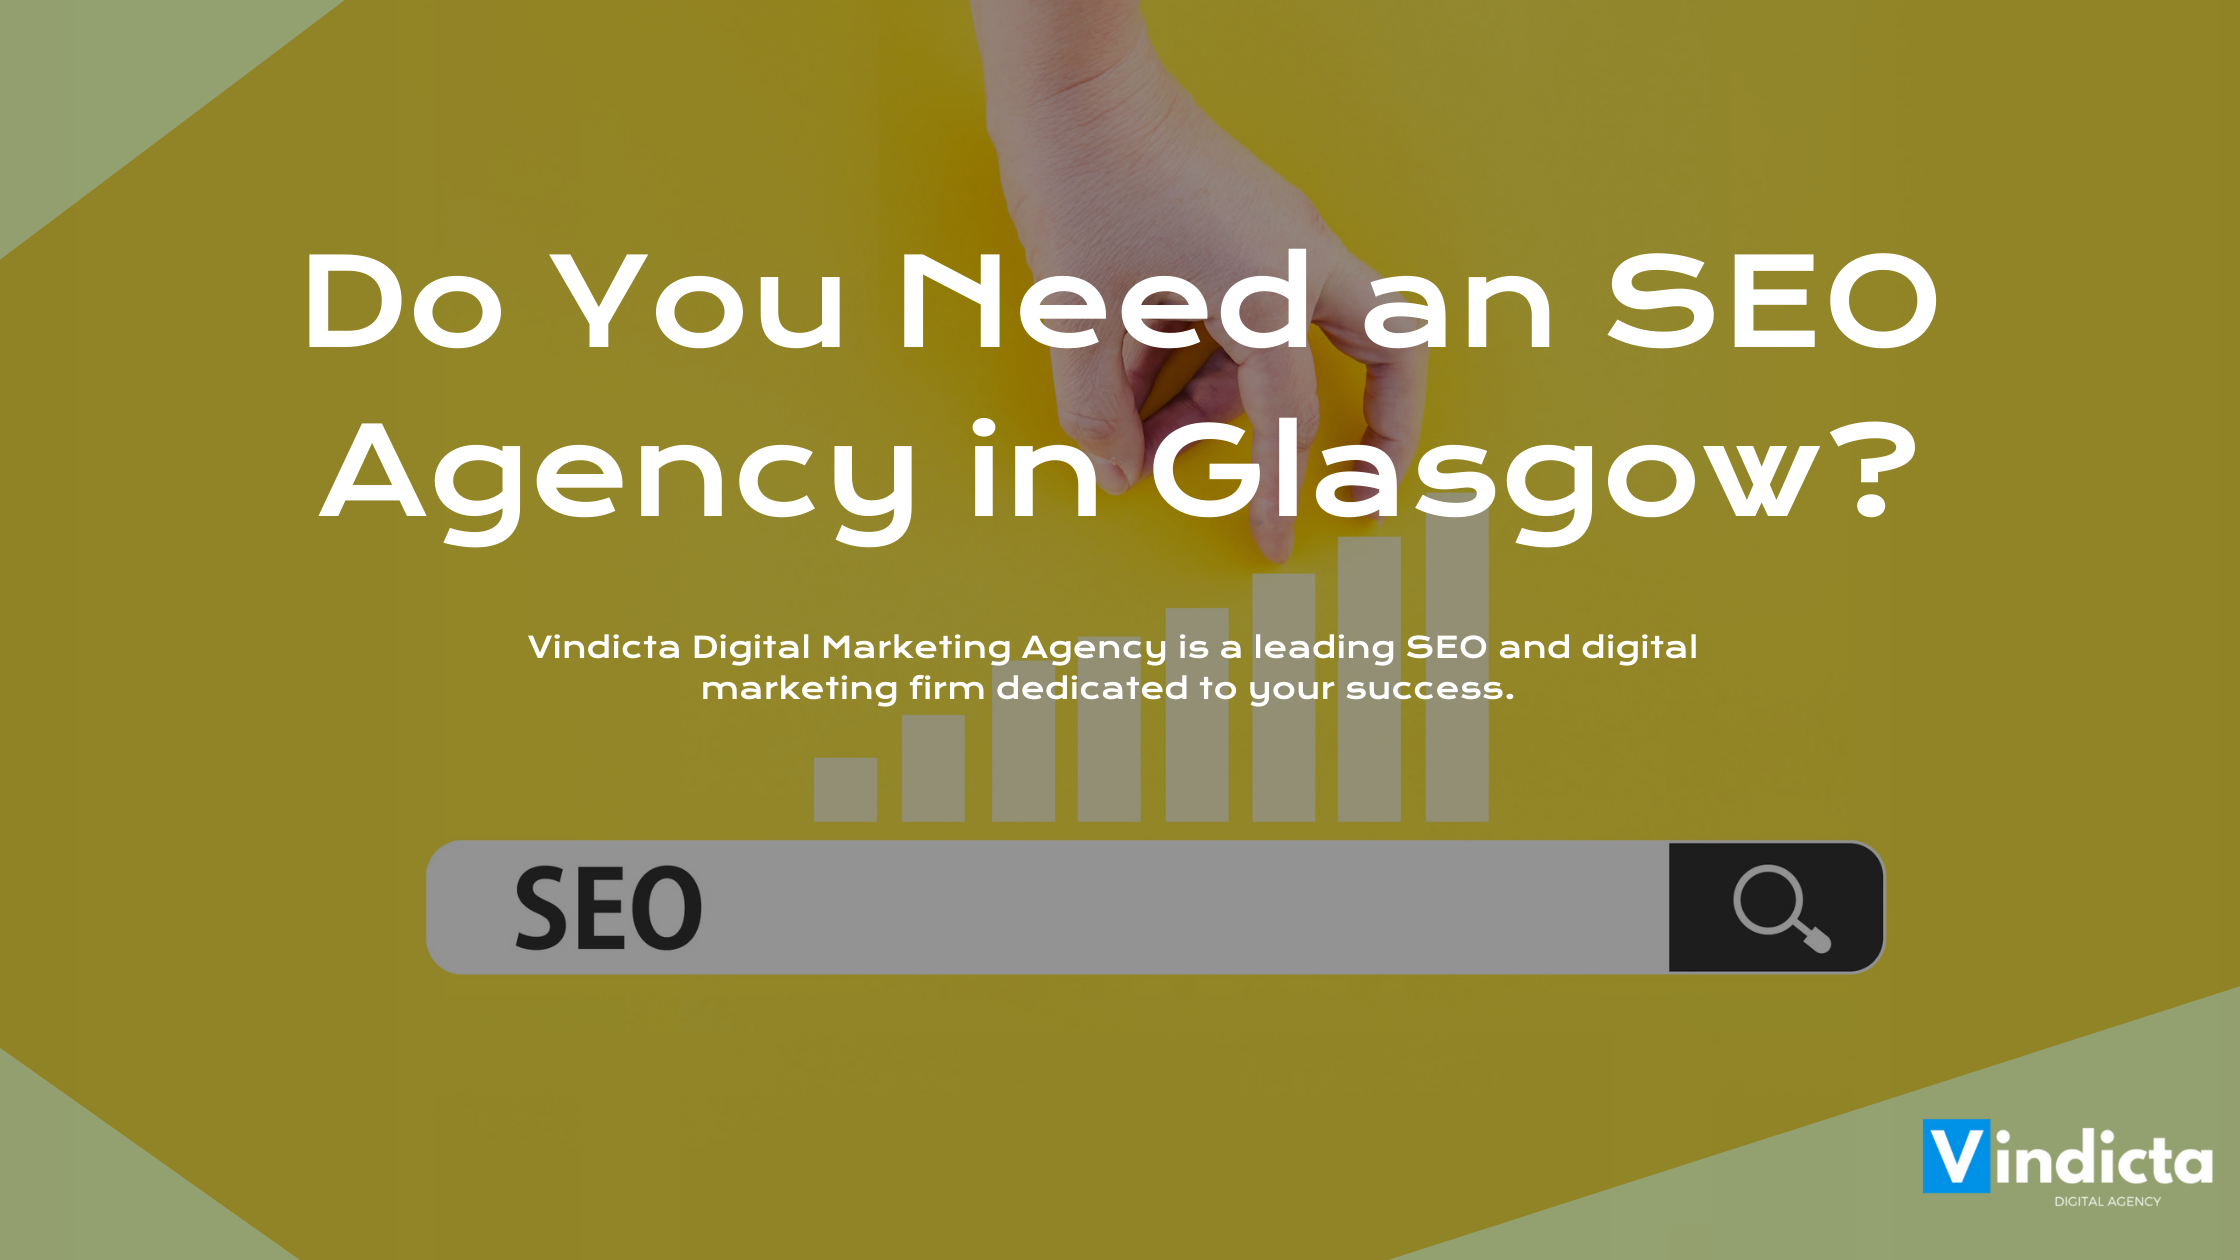 Do You Need an SEO Agency in Glasgow?